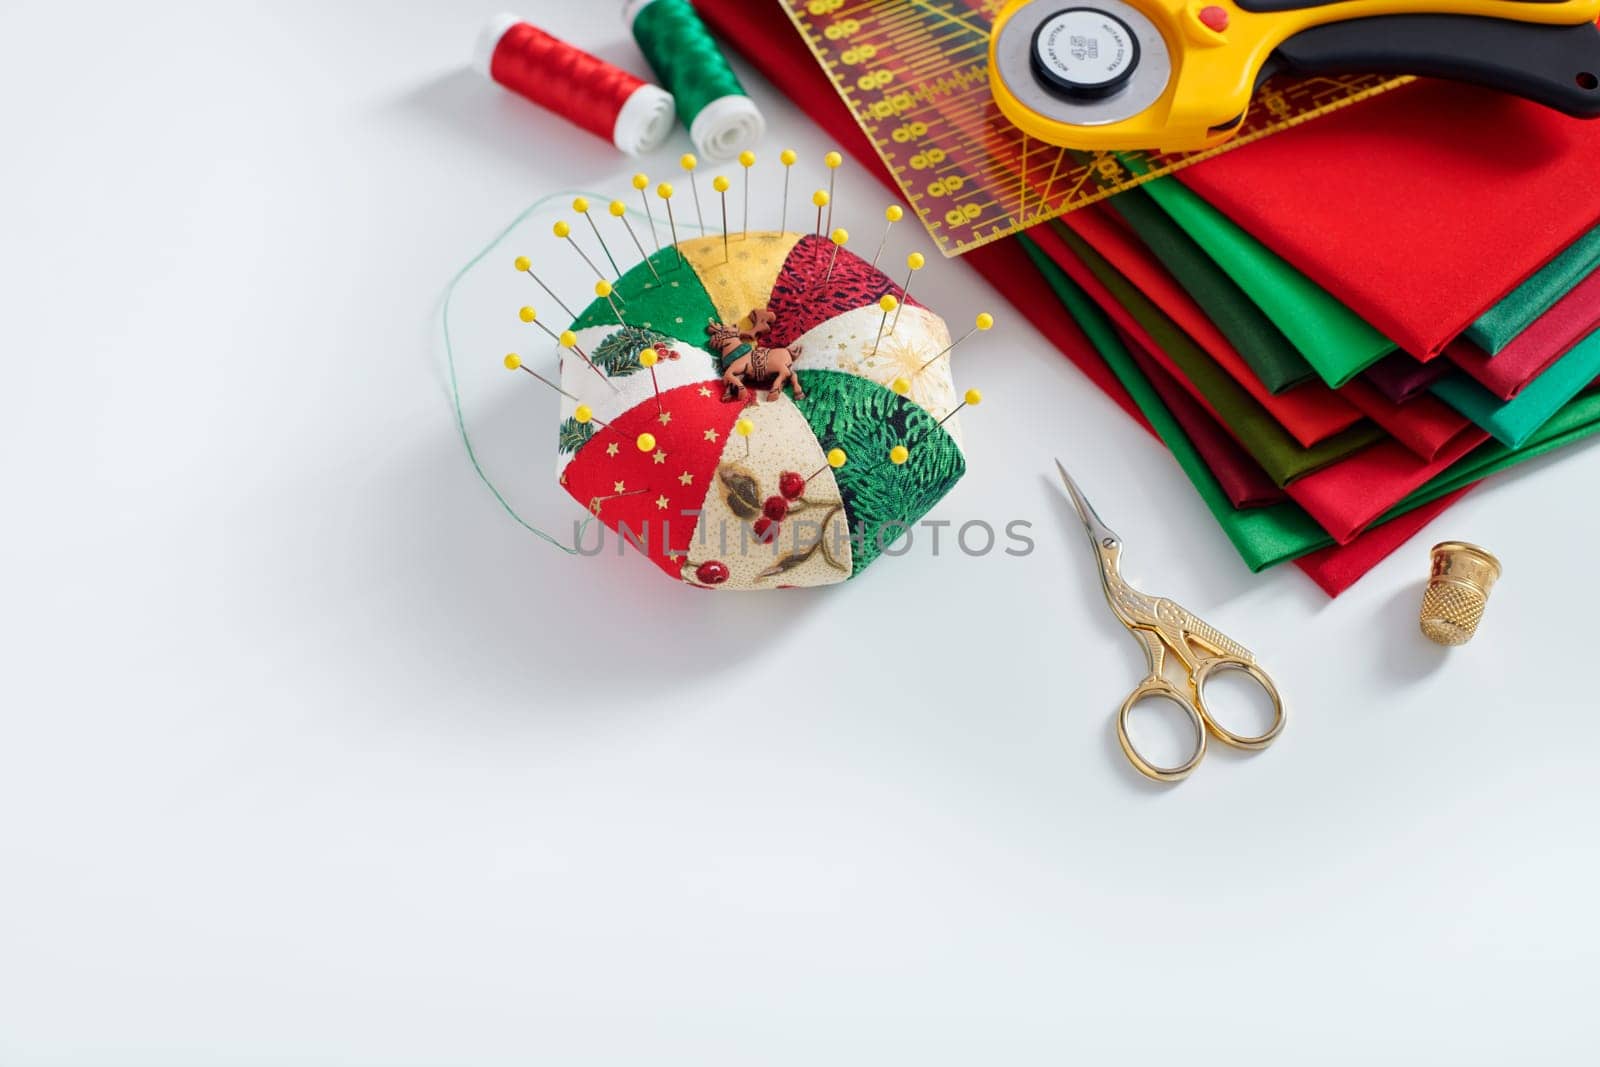 Pile of red and green fabrics, pincushion, sewing and quilting accessories on white background, space for text